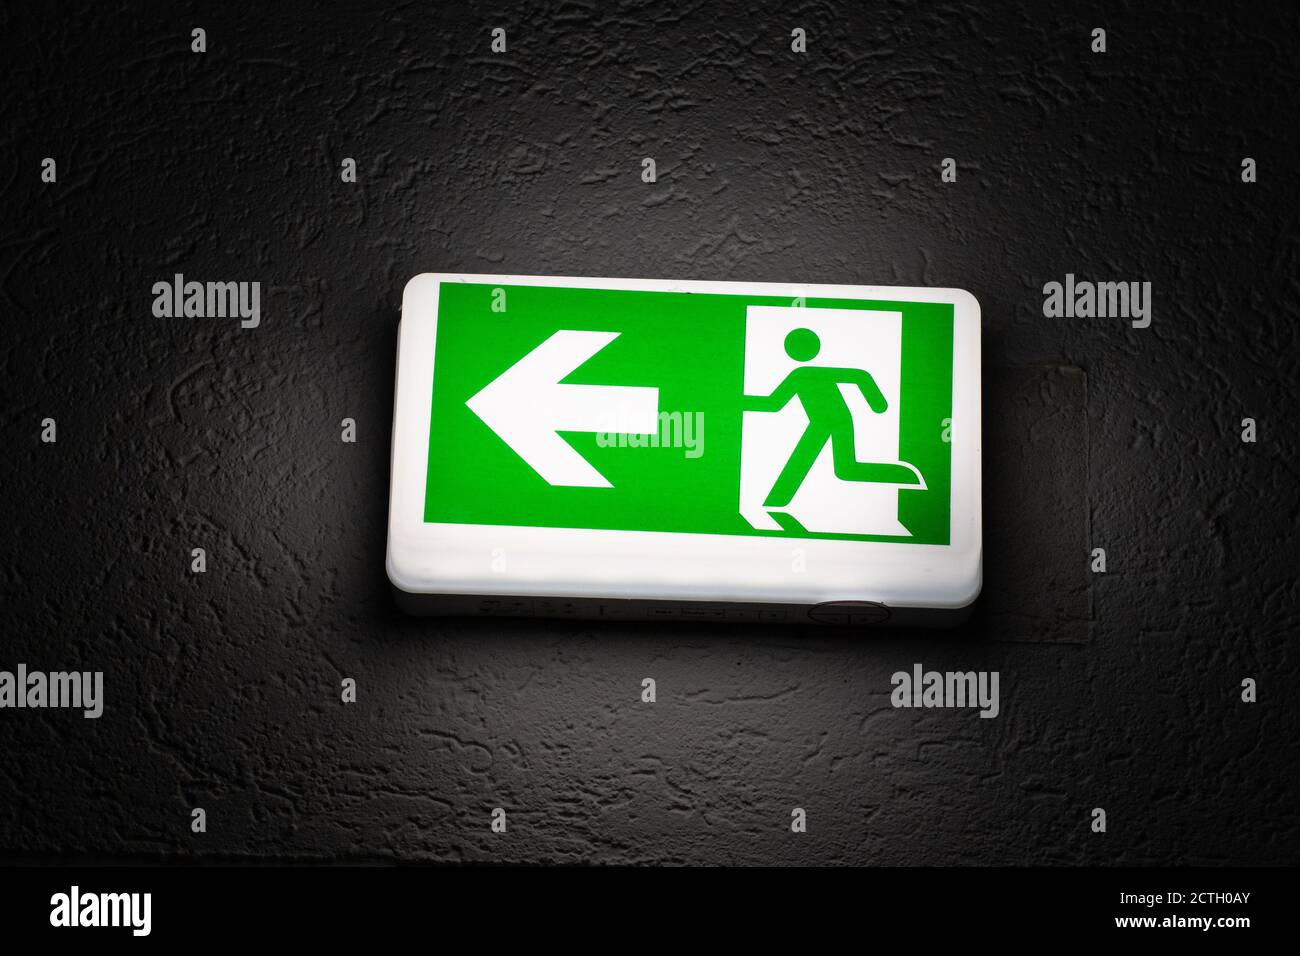 Emergency Exit sign in the dark Stock Photo